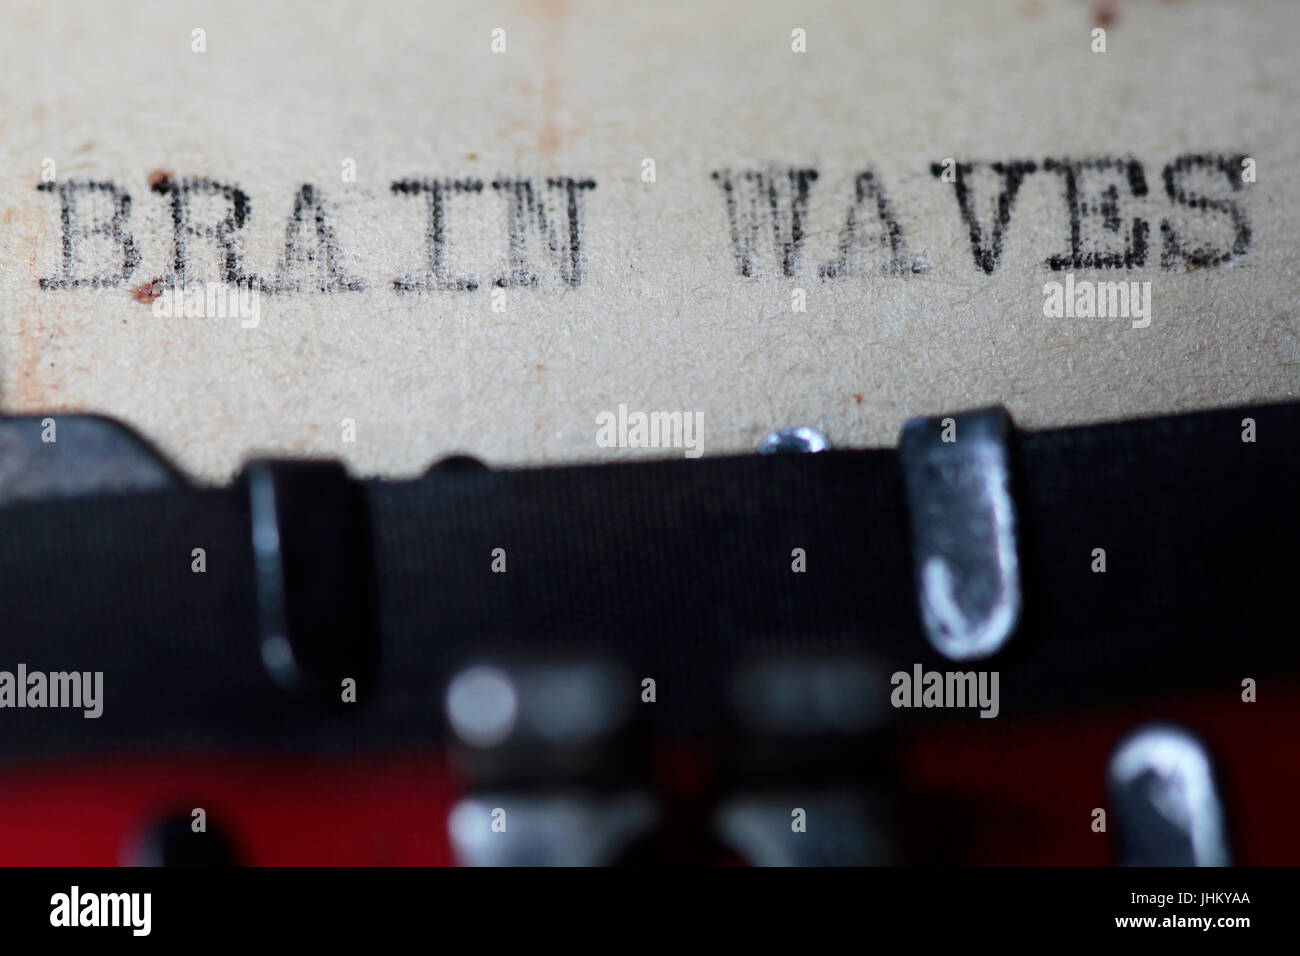 Brain waves typed in an old vintage paper Stock Photo